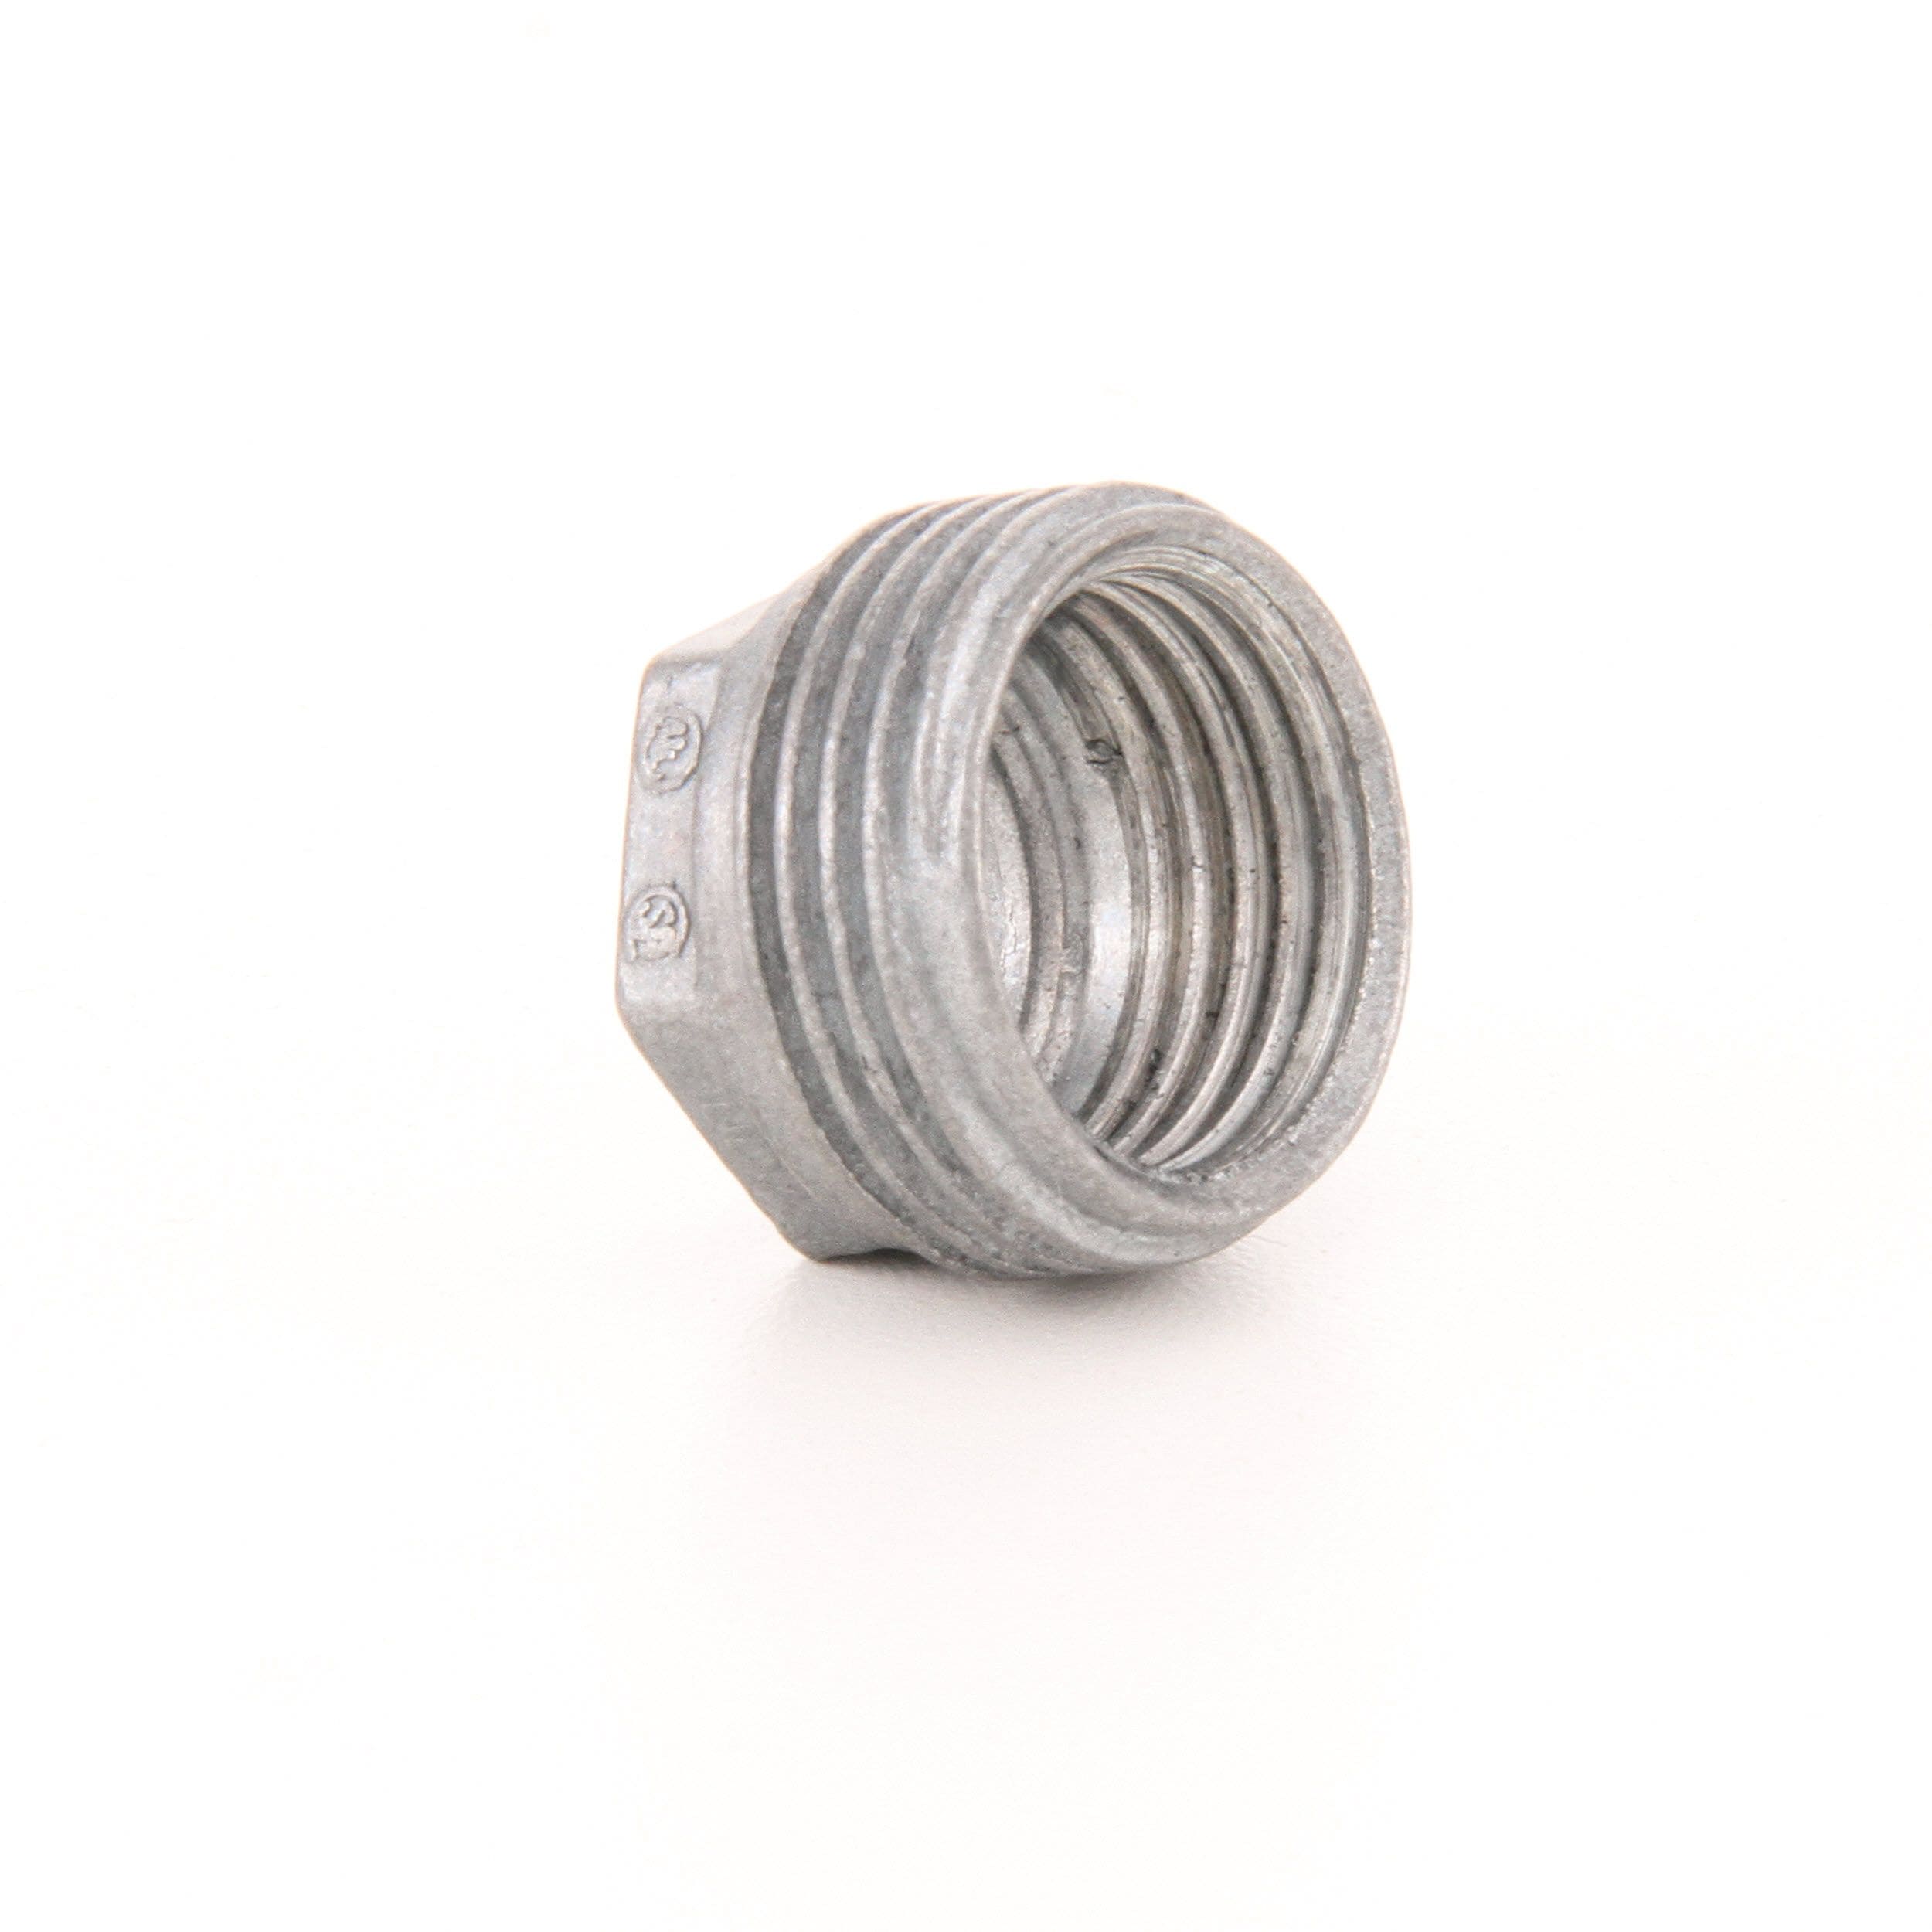 Rigid Threaded Reducing Conduit Face Bushing-Sold in Pairs of 2 1/2 to 3/8 In 